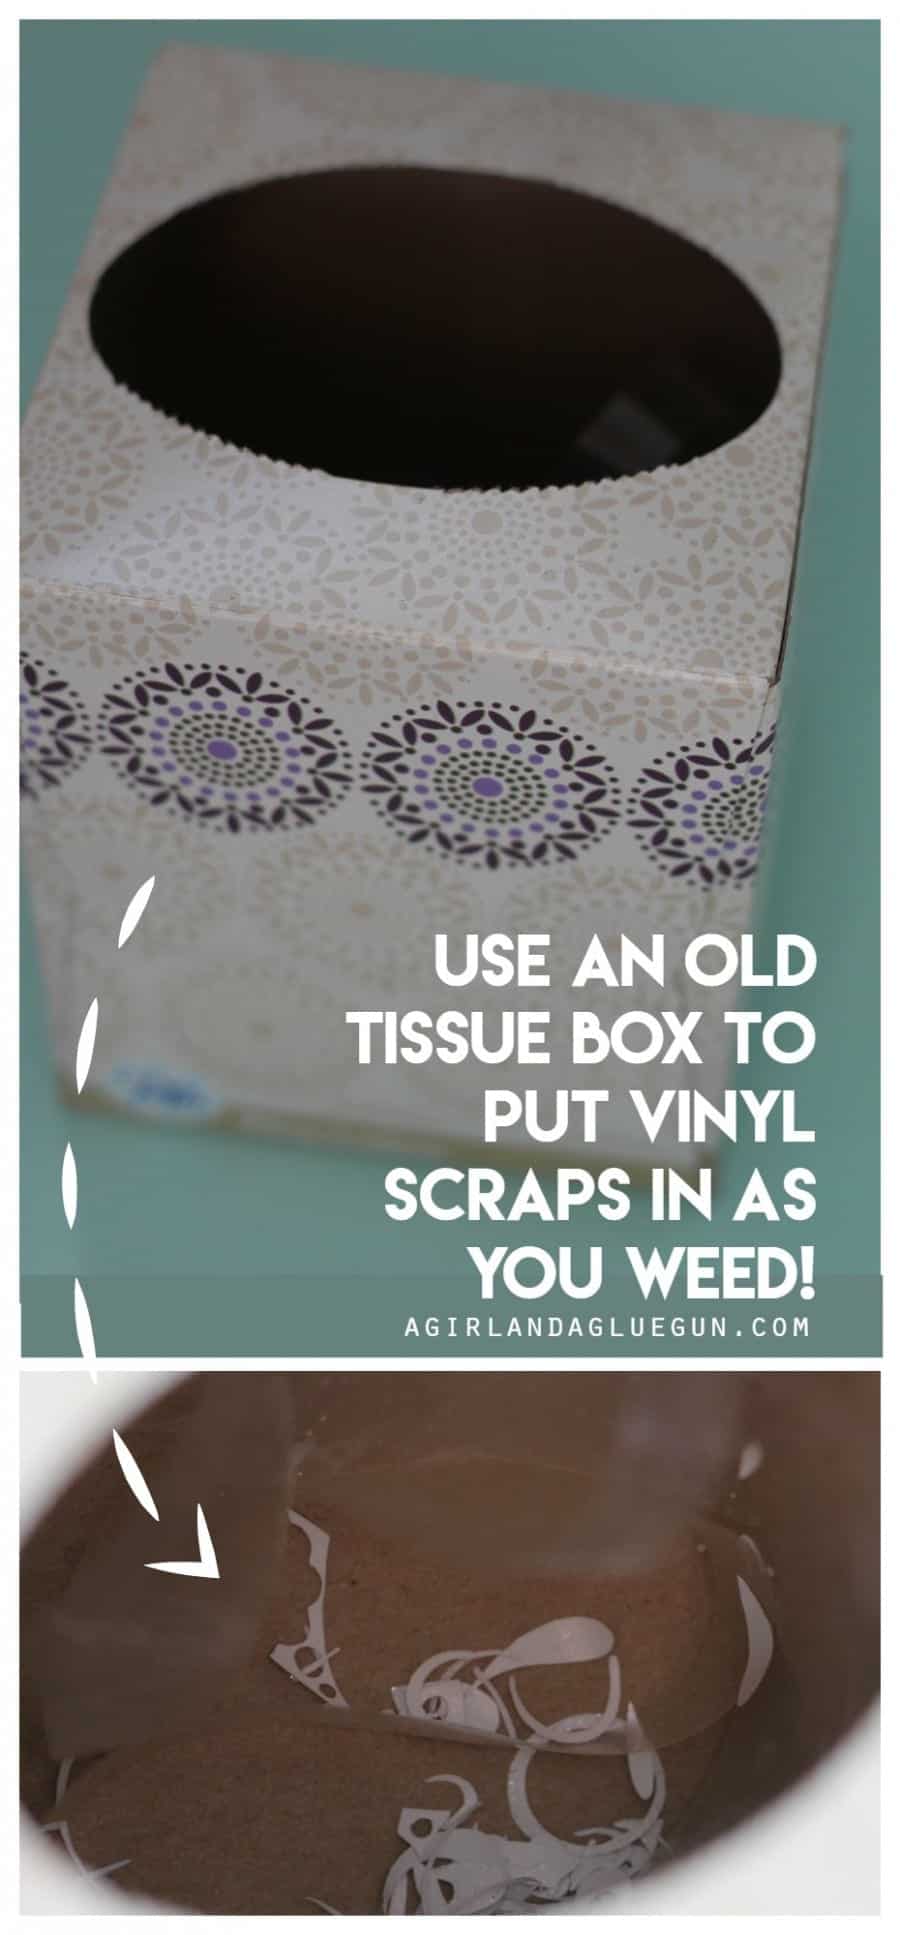 use an old tissue box to put vinyl scraps in as you weed! great hack